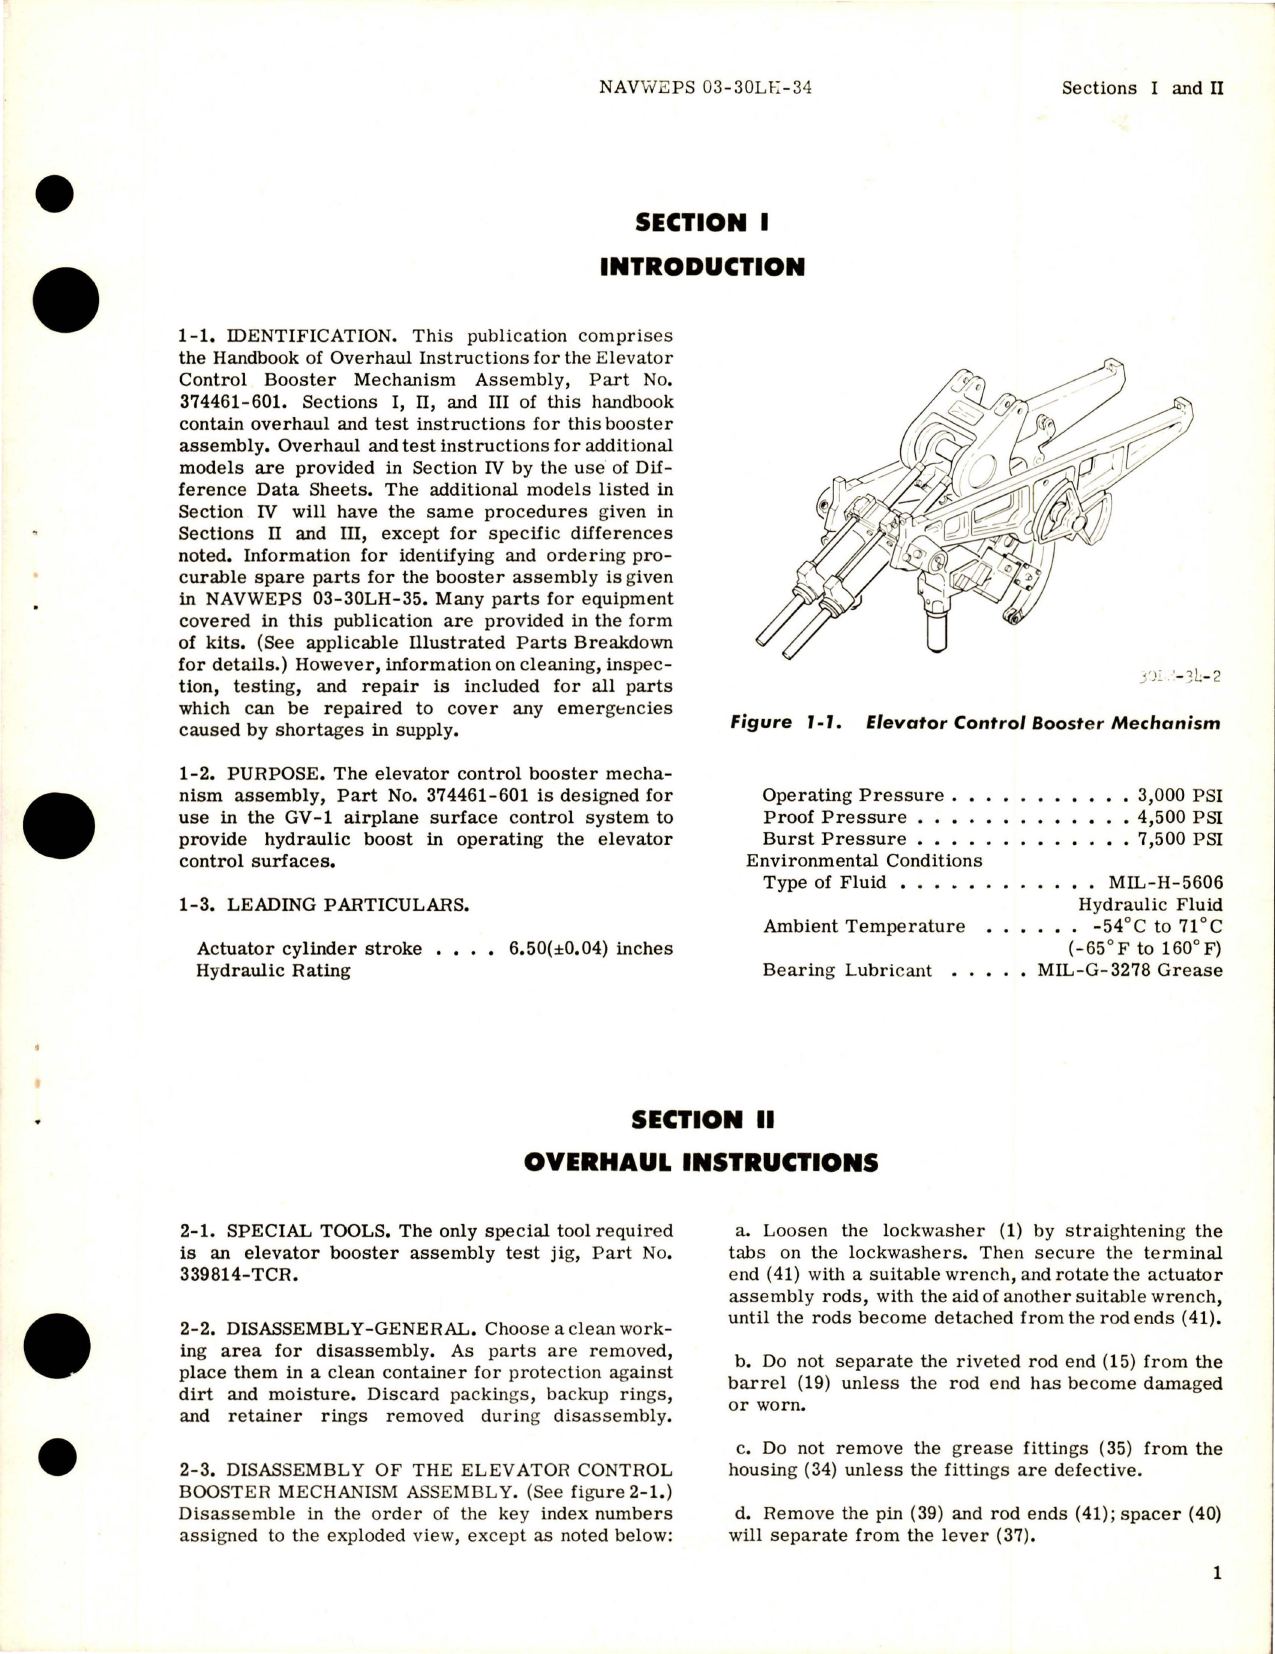 Sample page 5 from AirCorps Library document: Overhaul Instructions for Elevator Control Booster Mechanism Assembly - Parts 374461-601 and 374461-605